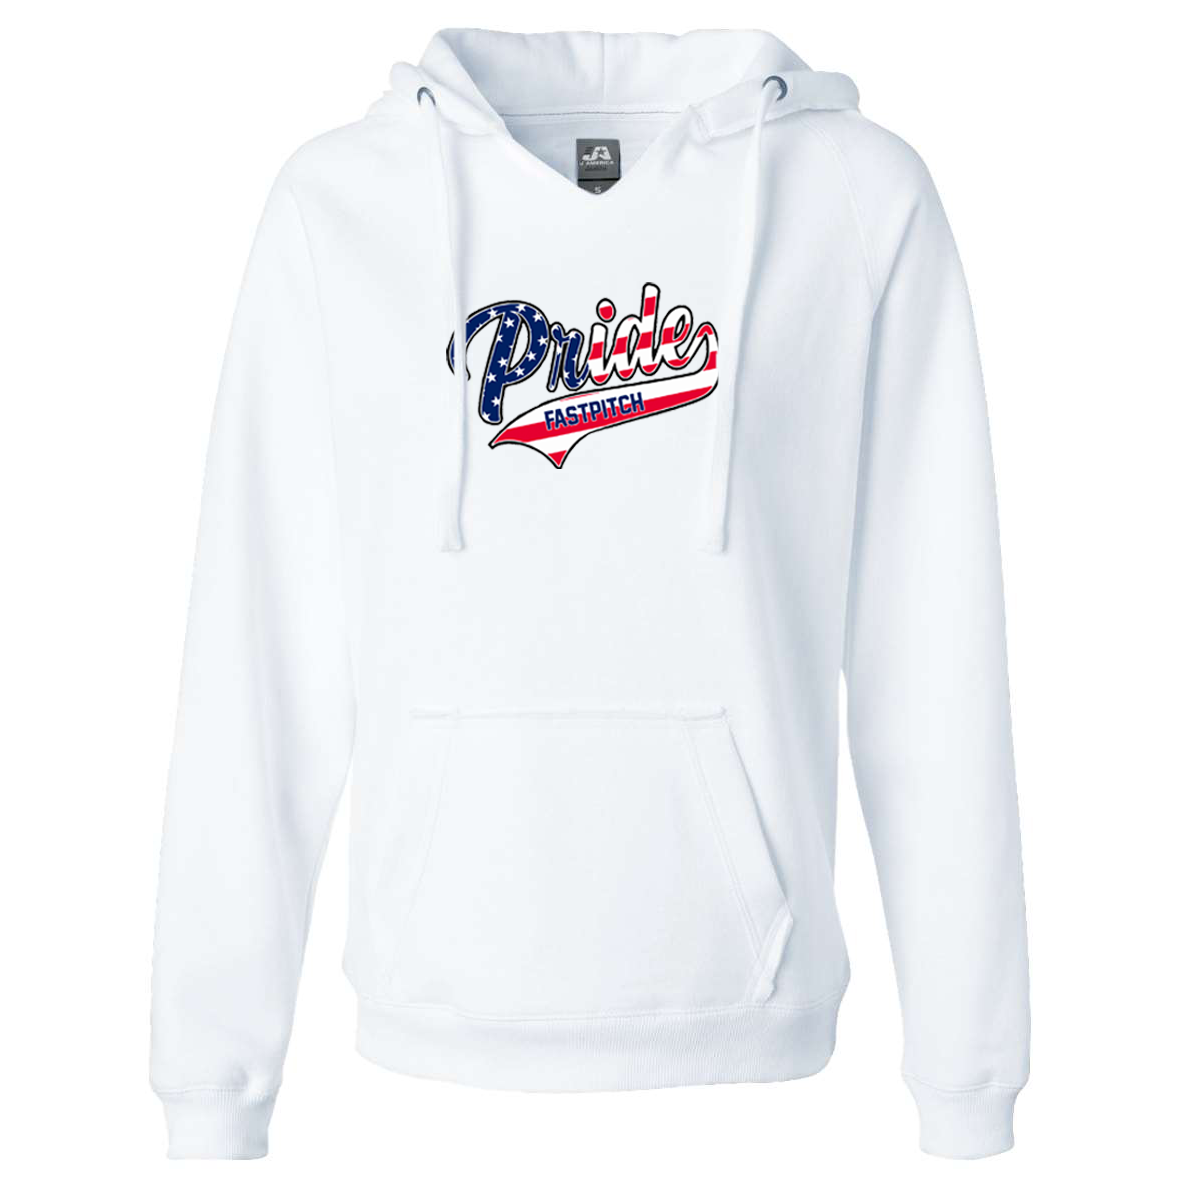 Long Island Pride Fastpitch Women's Sueded V-Neck Hoodie